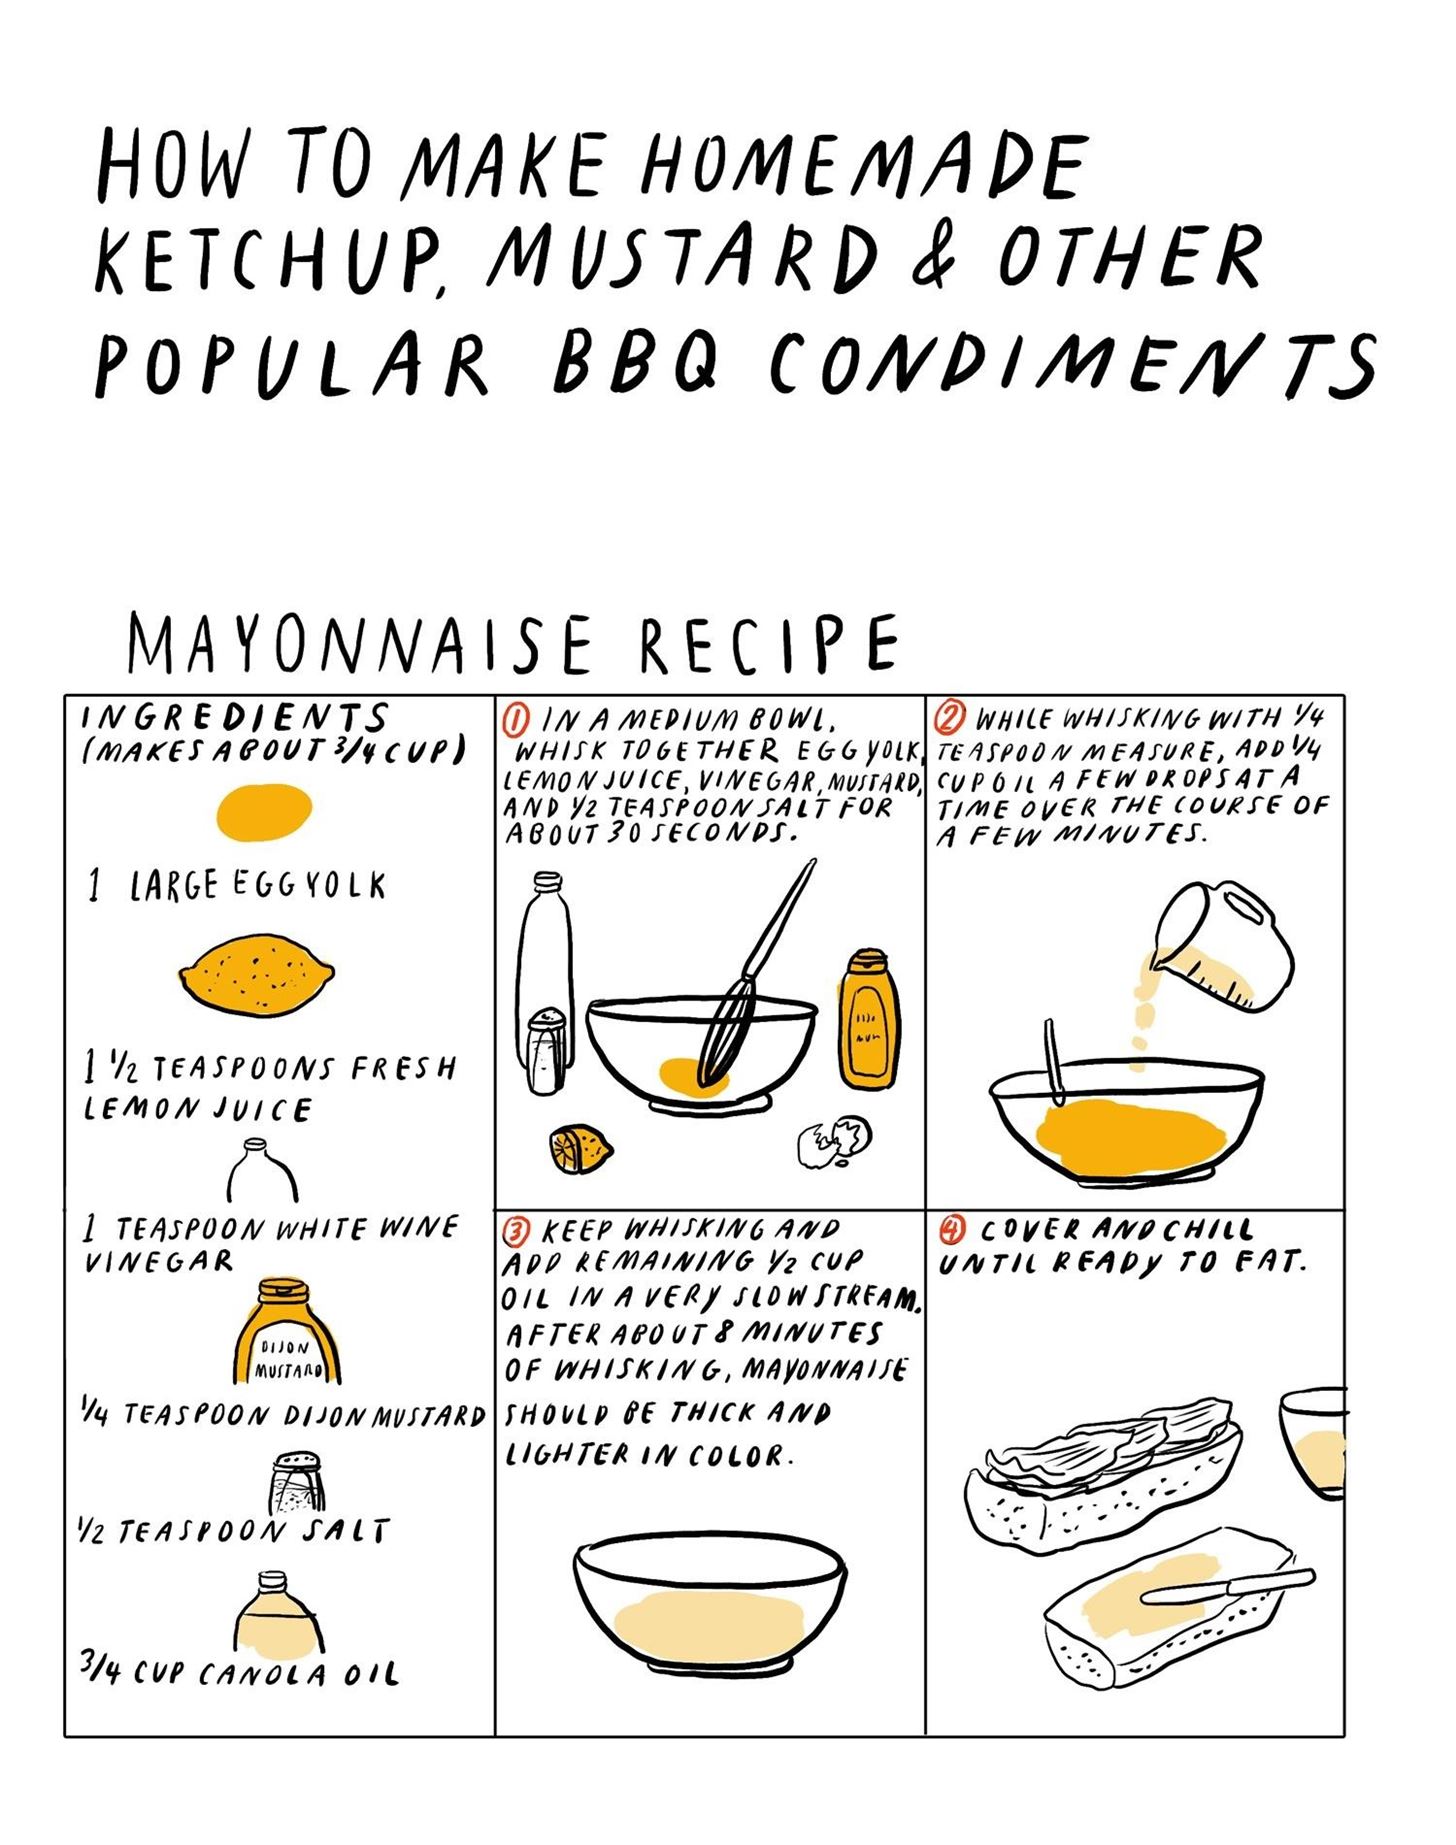 How to Make Homemade Ketchup, Mustard, & Other Common BBQ Condiments